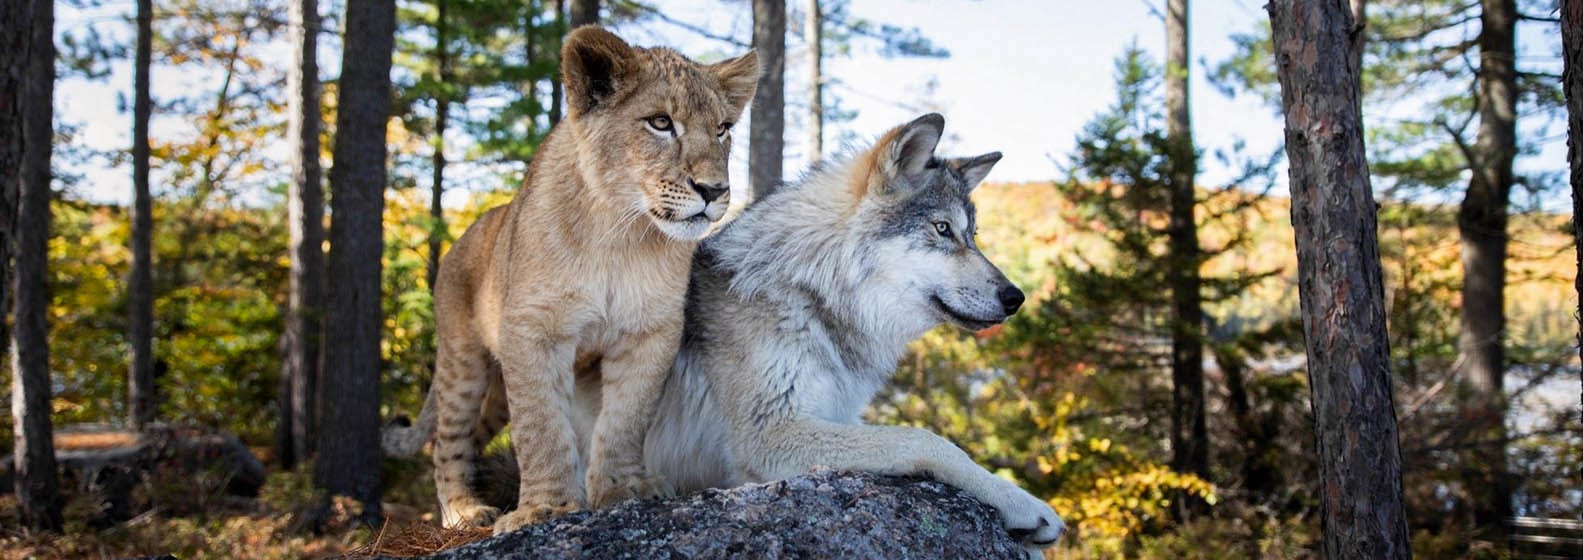 The Wolf and the Lion - Header Image